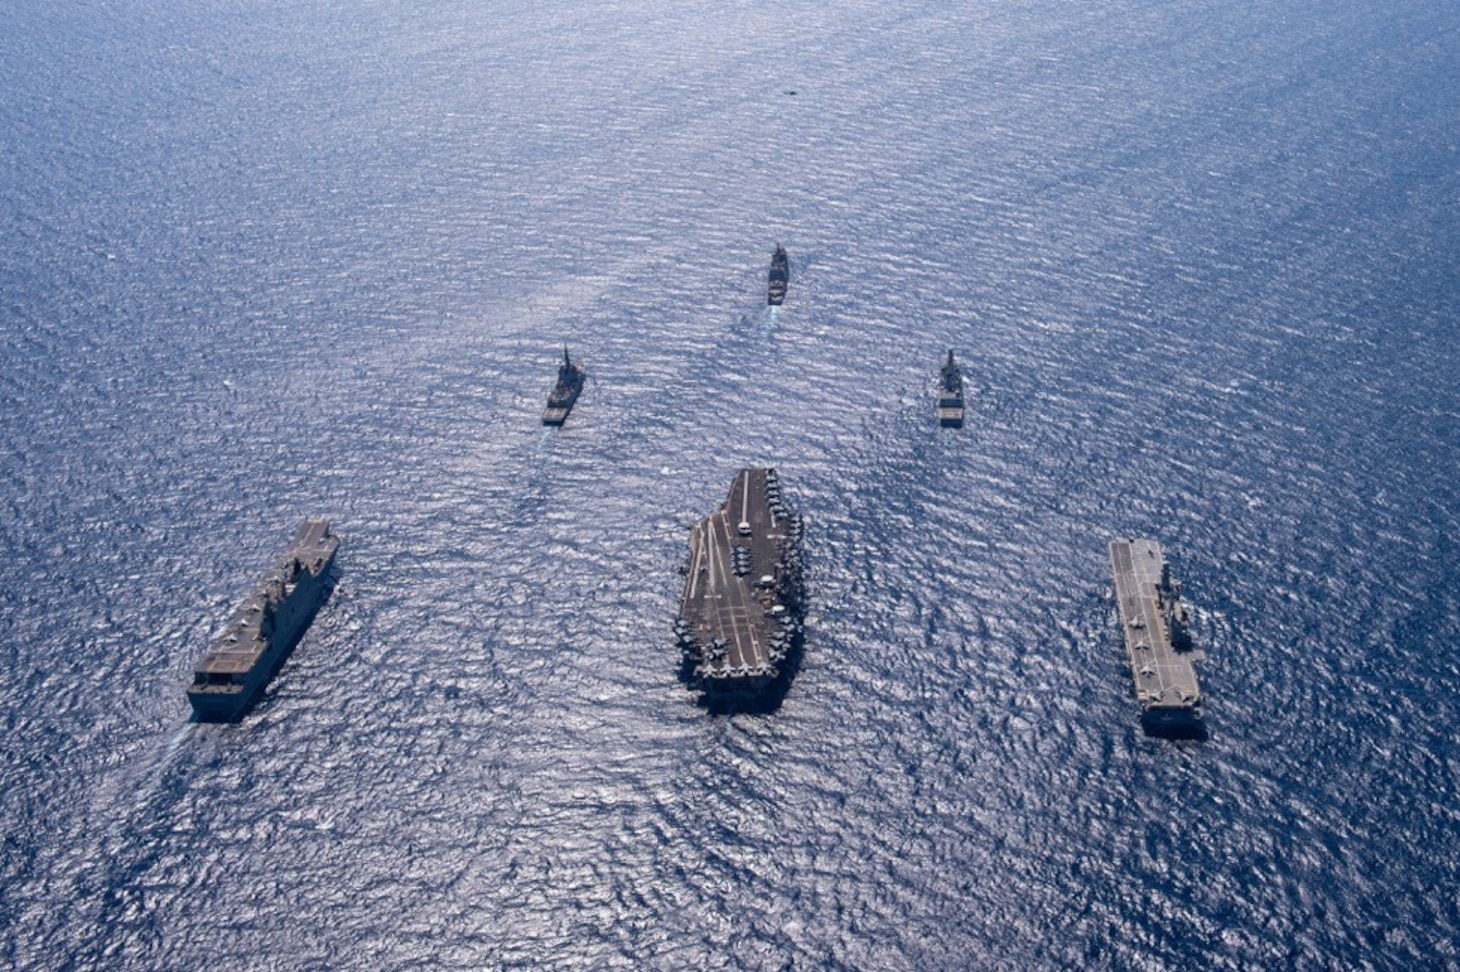 ADRIATIC SEA (May 31, 2022) The Nimitz-class aircraft carrier USS Harry S. Truman (CVN 75), back center, transits in formation with, from left to right, Spanish Navy multi-purpose amphibious assault ship-aircraft carrier ESPS Juan Carlos I (L-61), Spanish Navy F-100 class air defense frigate ESPS Almirante Juan De Borbón (F-102), Ticonderoga-class guided-missile cruiser USS San Jacinto (CG 56), Italian Navy Andrea Doria-class air defense destroyer ITS Andrea Doria (D-553) and Italian Navy Cavour-class aircraft carrier ITS Cavour (CVH 550) during NATO-led activity Neptune Shield 22 in the Adriatic Sea, May 31, 2022. Neptune Shield 22 is the natural evolution of NATO's ability to integrate the high-end maritime warfare capabilities of an Aircraft Carrier Strike Group, an Amphibious Ready Group and a Marine Expeditionary Unit to support the defense of the alliance. The Harry S. Truman Carrier Strike Group is on a scheduled deployment in the U.S. Naval Forces Europe area of operations, employed by U.S. Sixth Fleet to defend U.S., allied and partner interests.  (U.S. Navy photo by Mass Communication Specialist 3rd Class Crayton Agnew)